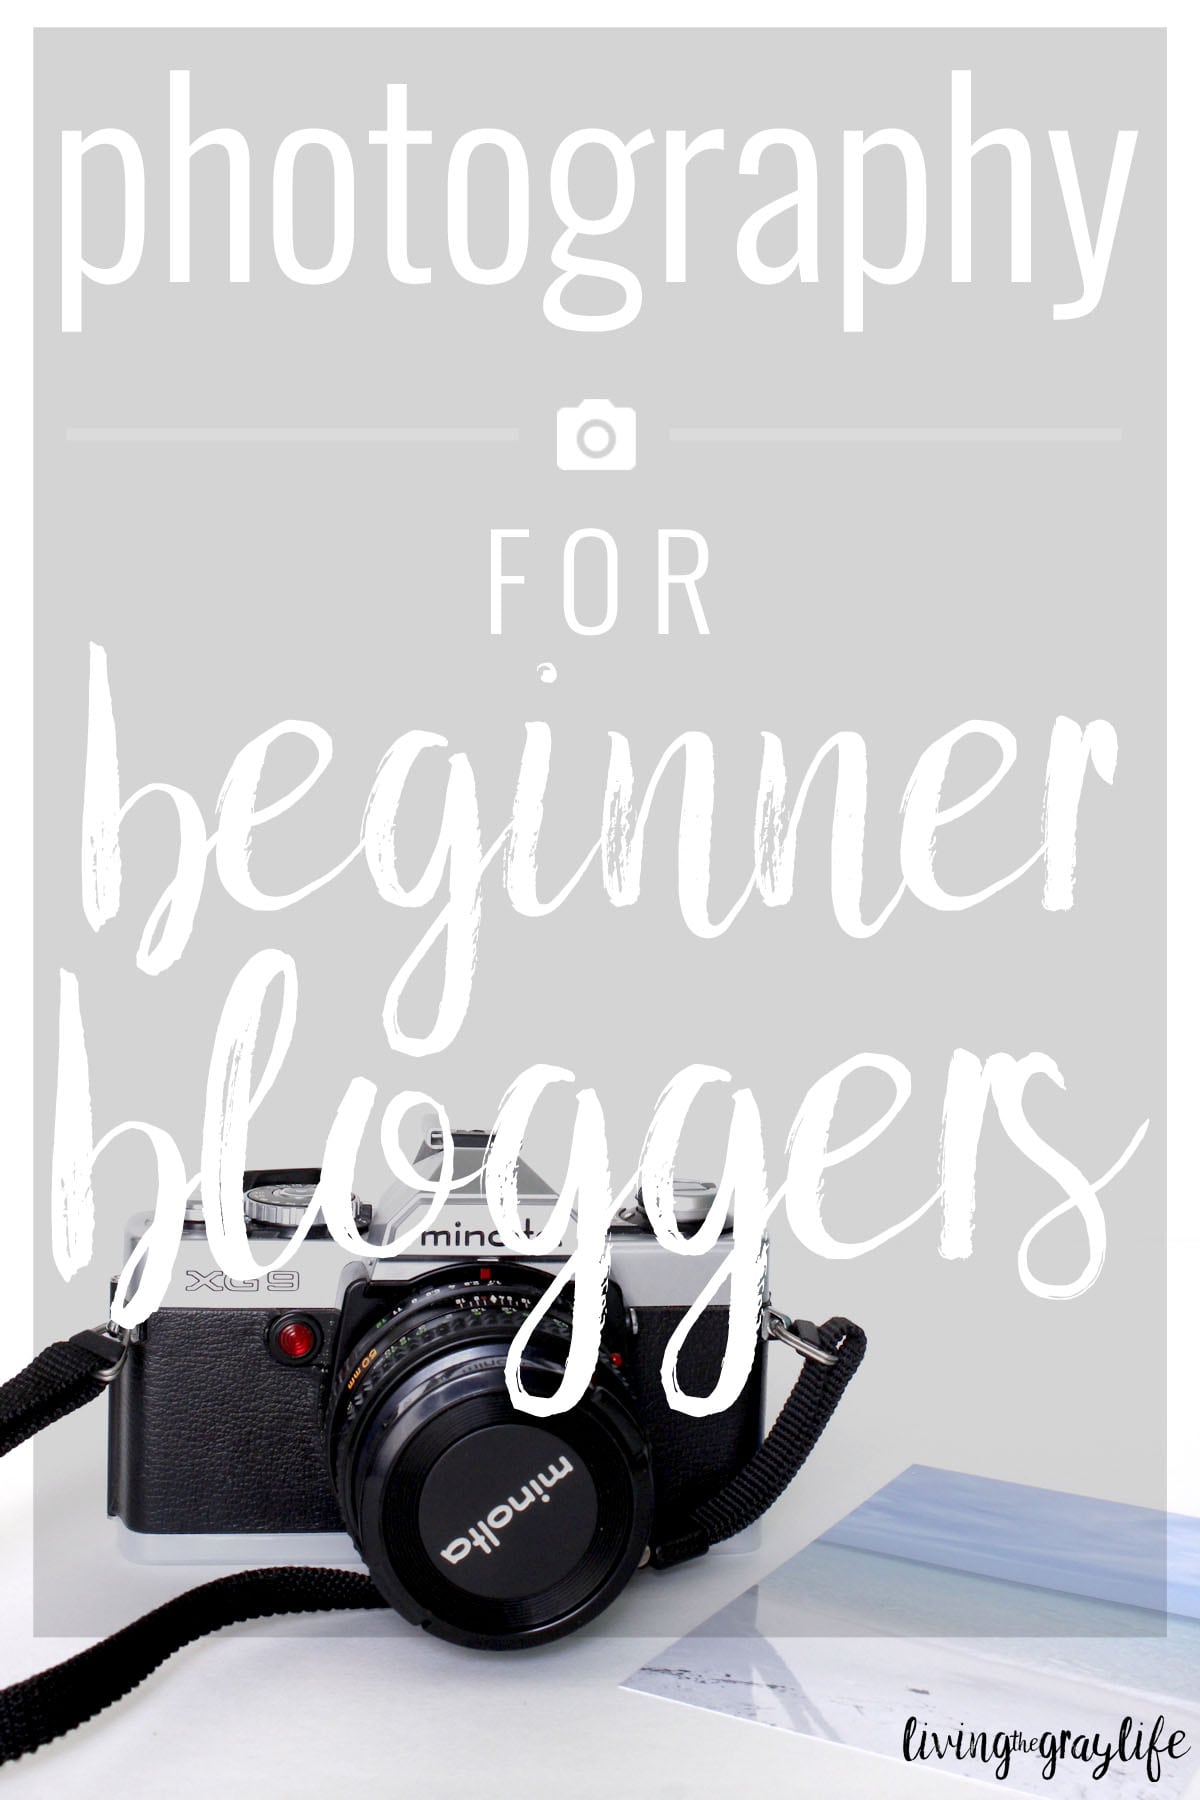 Are you a beginner blogger looking to improve your photography? Check out my tips on lighting, backdrops, cameras, and what to do if you're crunched for time!